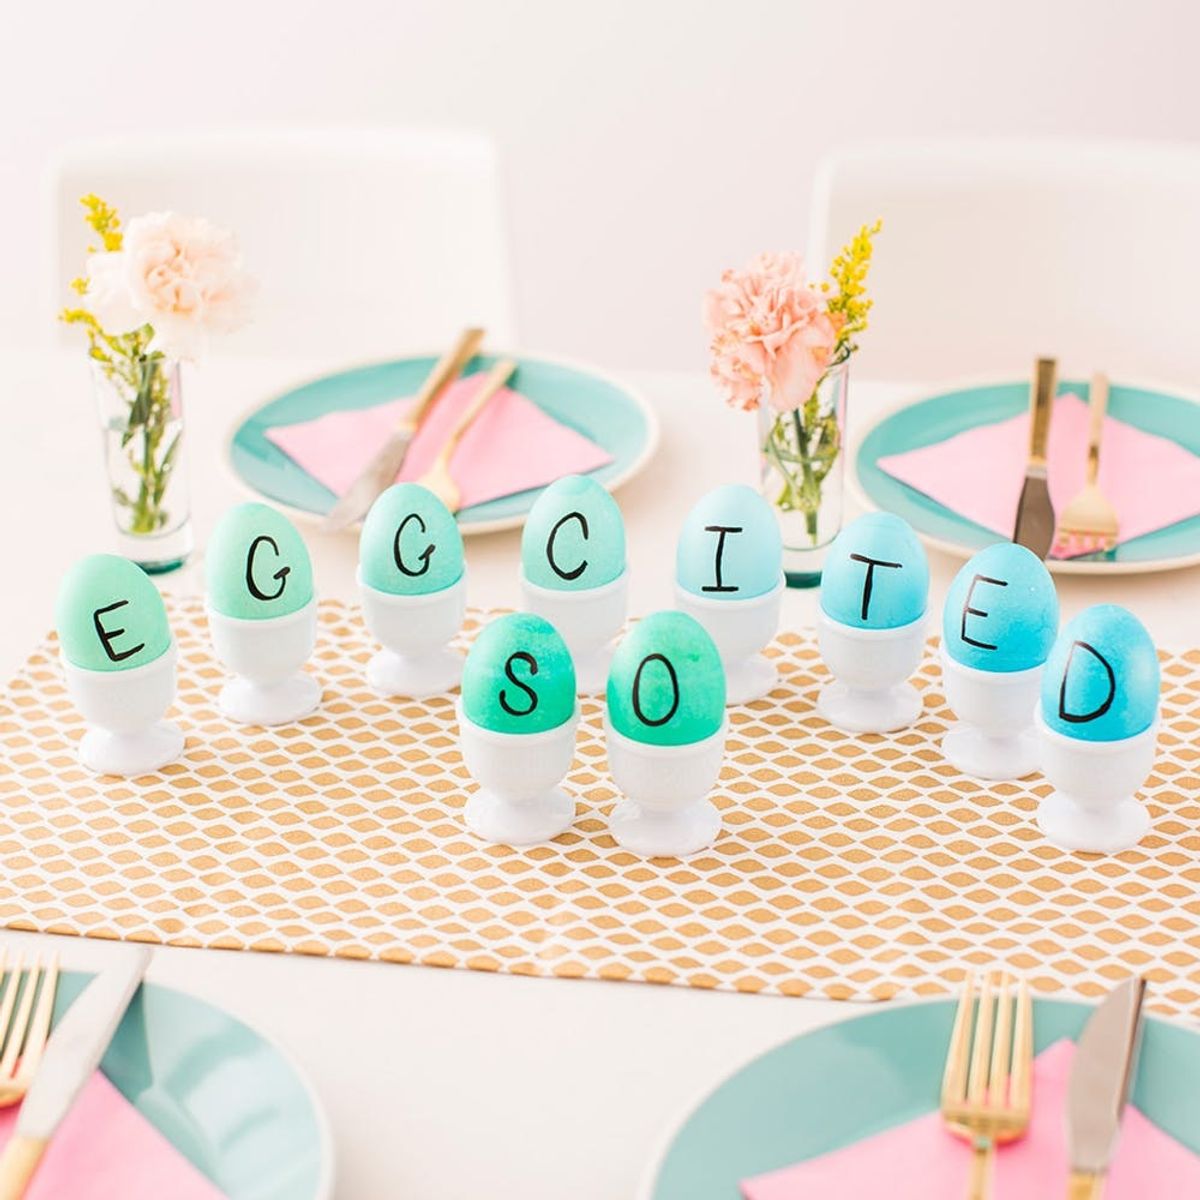 How to Make the Punniest Easter Egg Centerpiece EVER